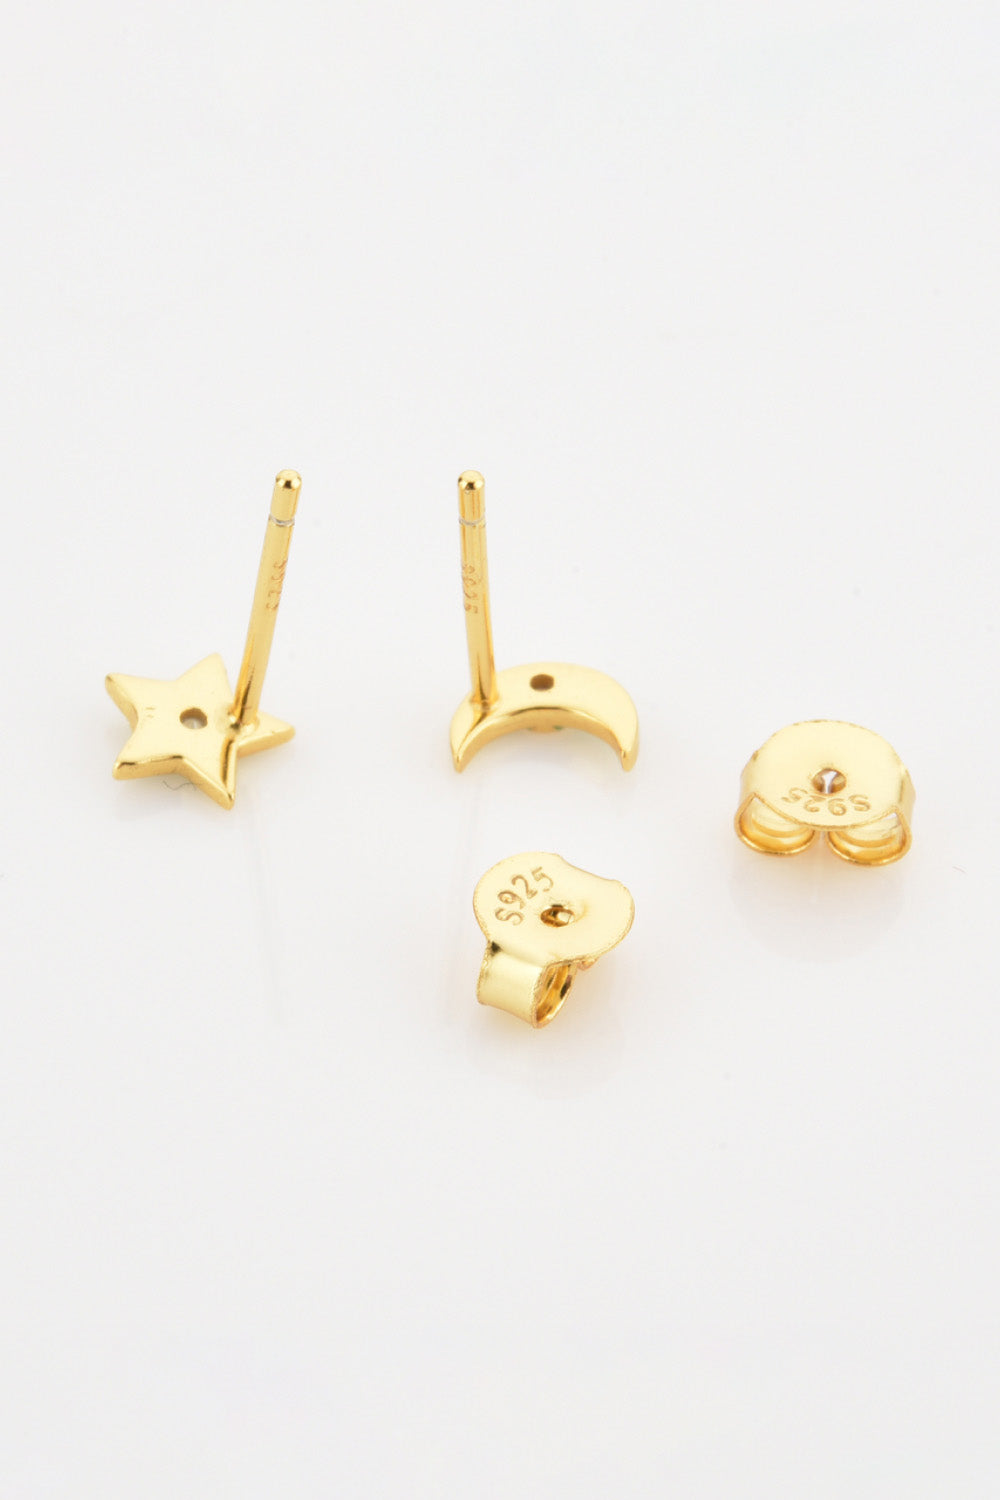 Star and Moon Zircon Mismatched Earrings The Stout Steer